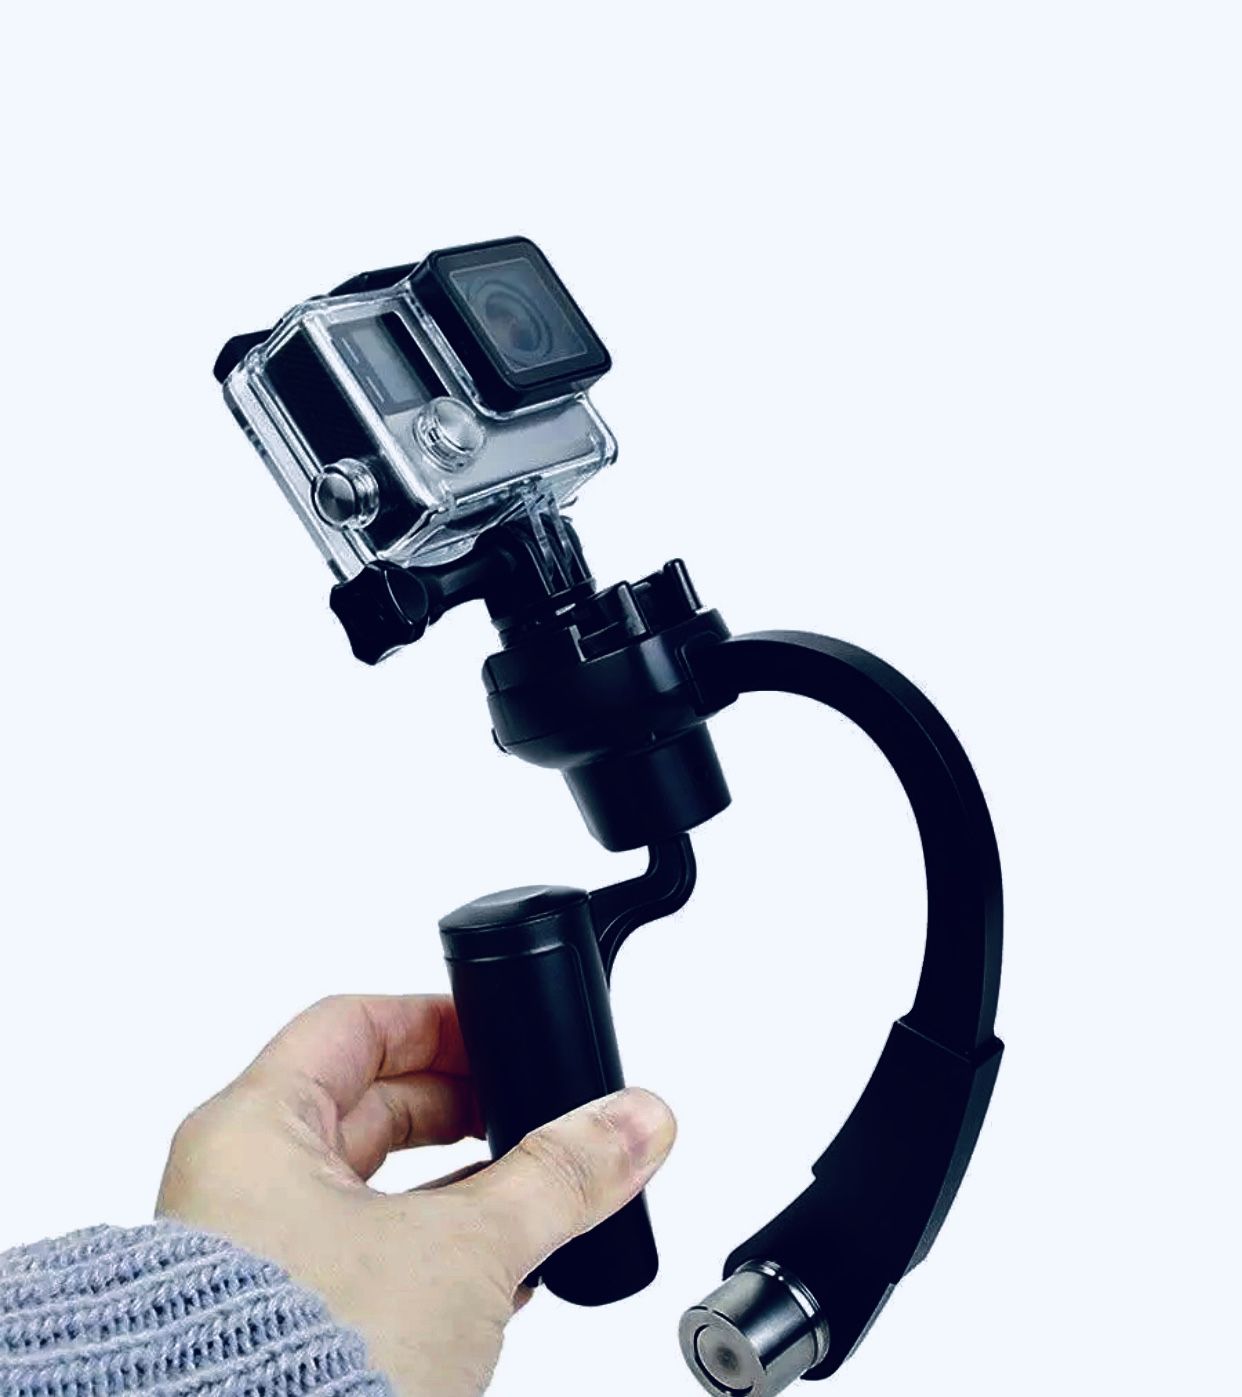 Steadycam Curve for any GoPro camera